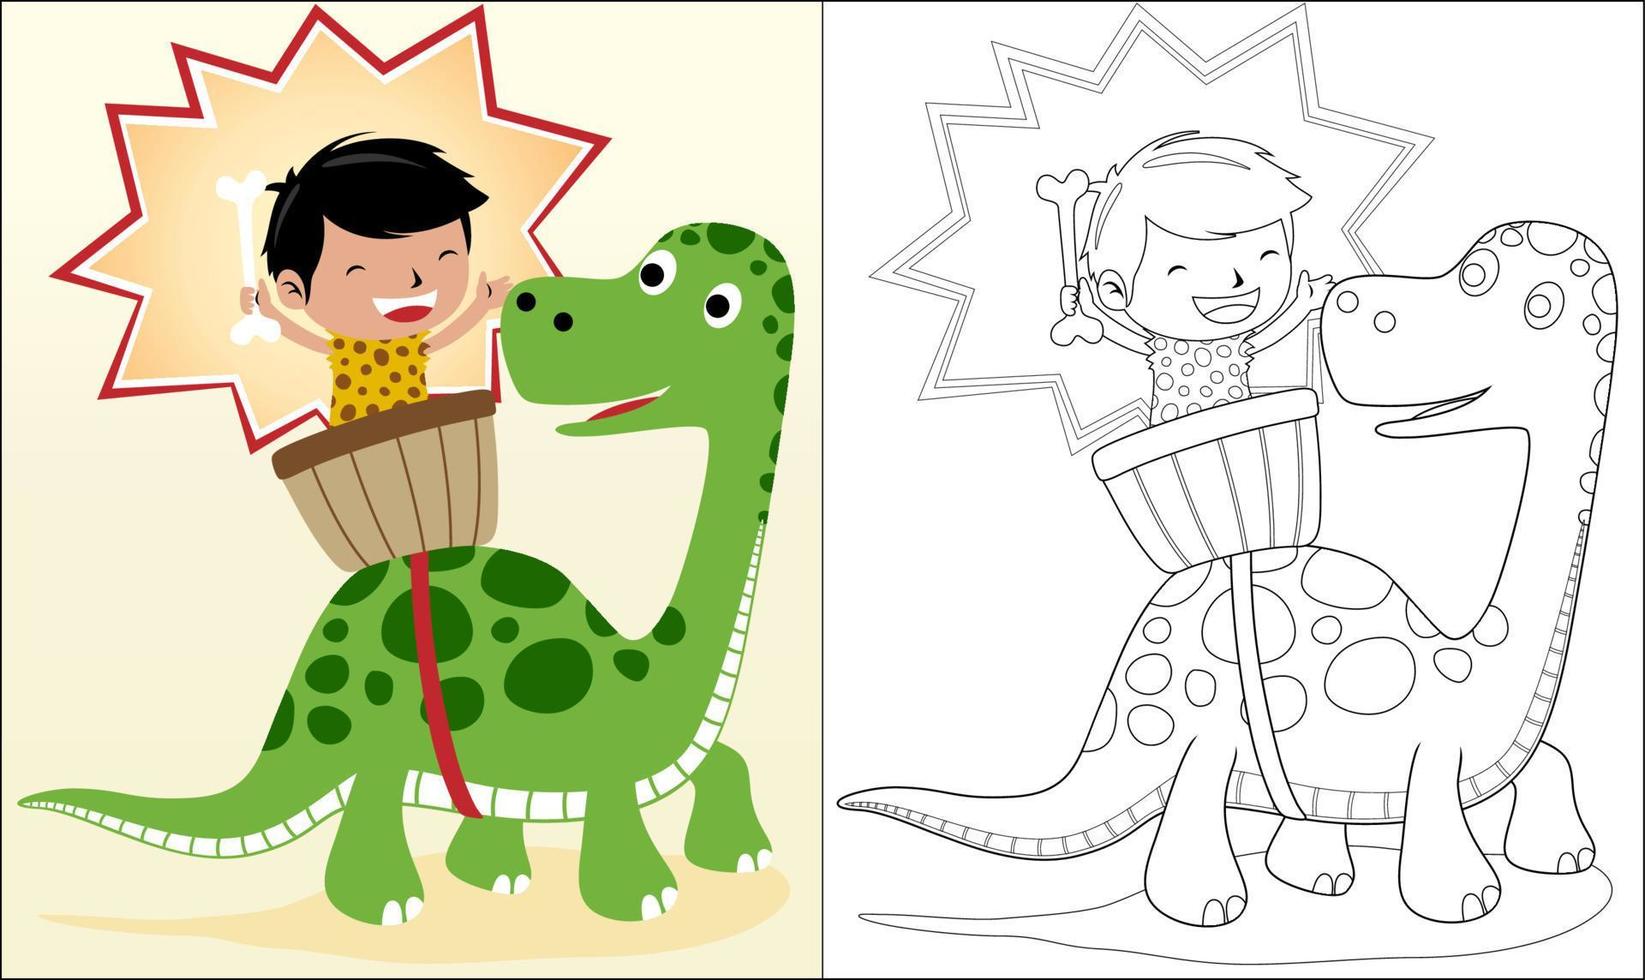 Coloring book or page of boy in caveman costume riding dinosaur vector